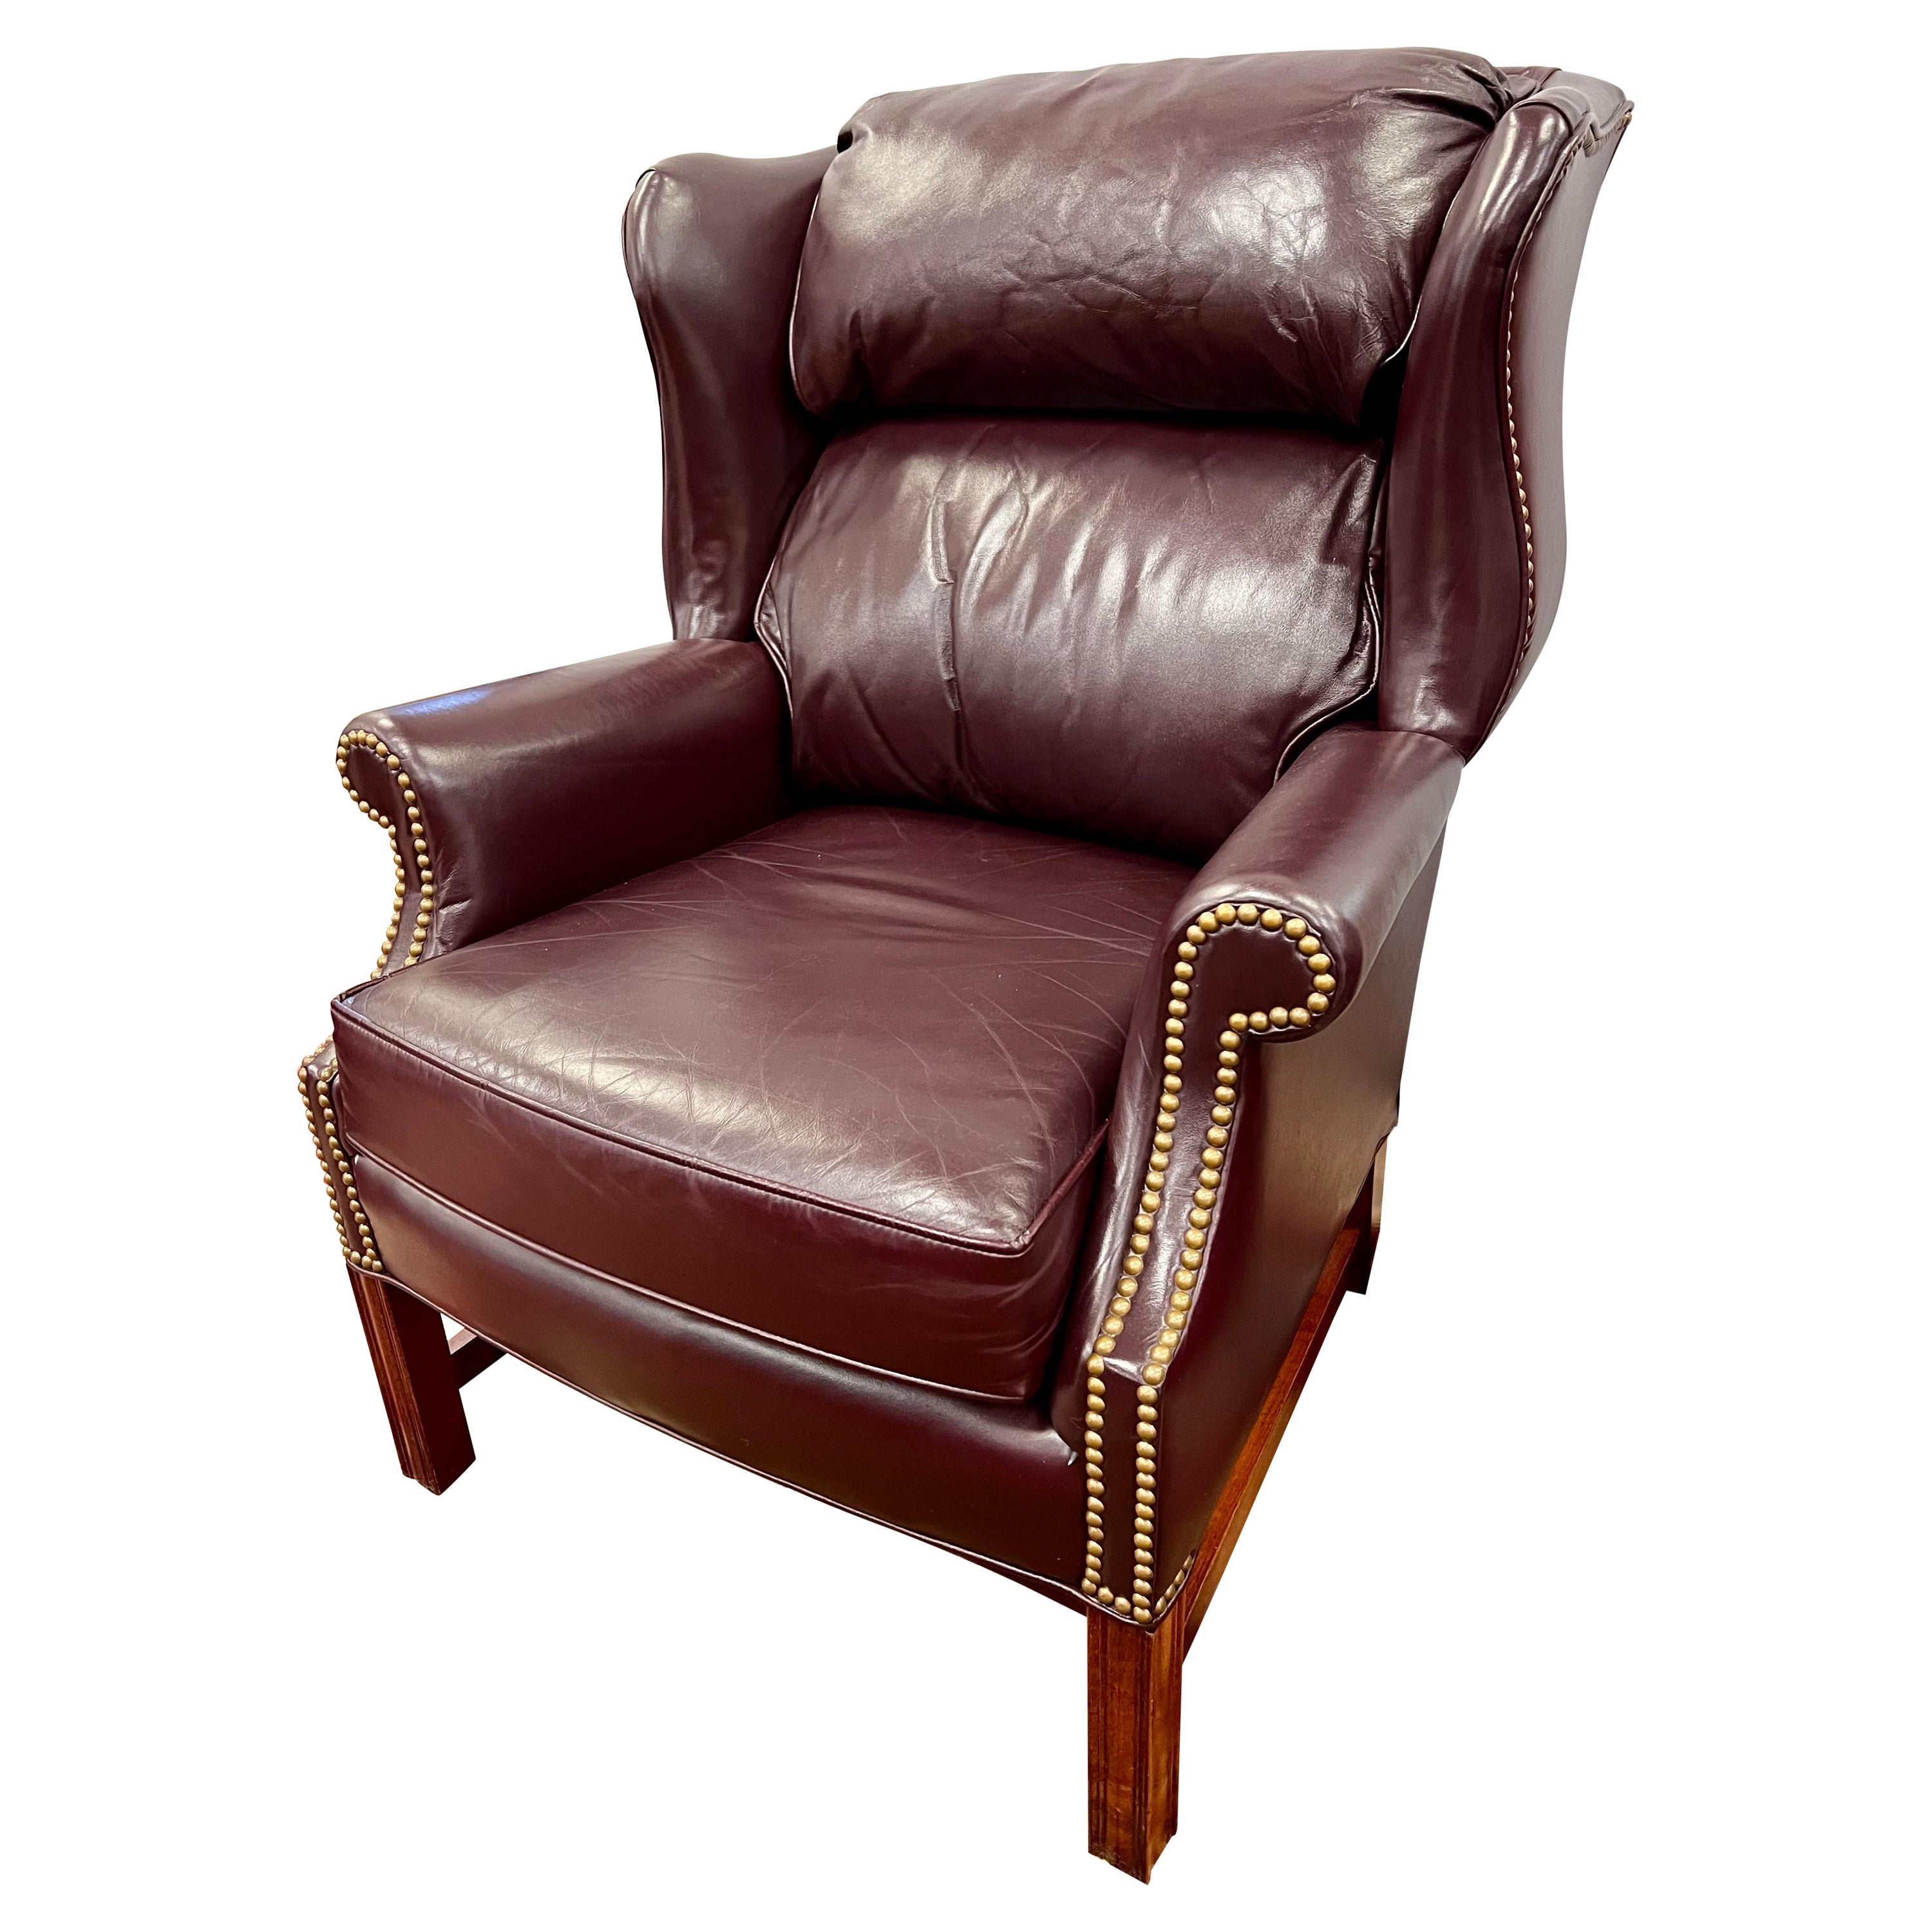 Burgundy Leather Wingback Chair with Nailheads